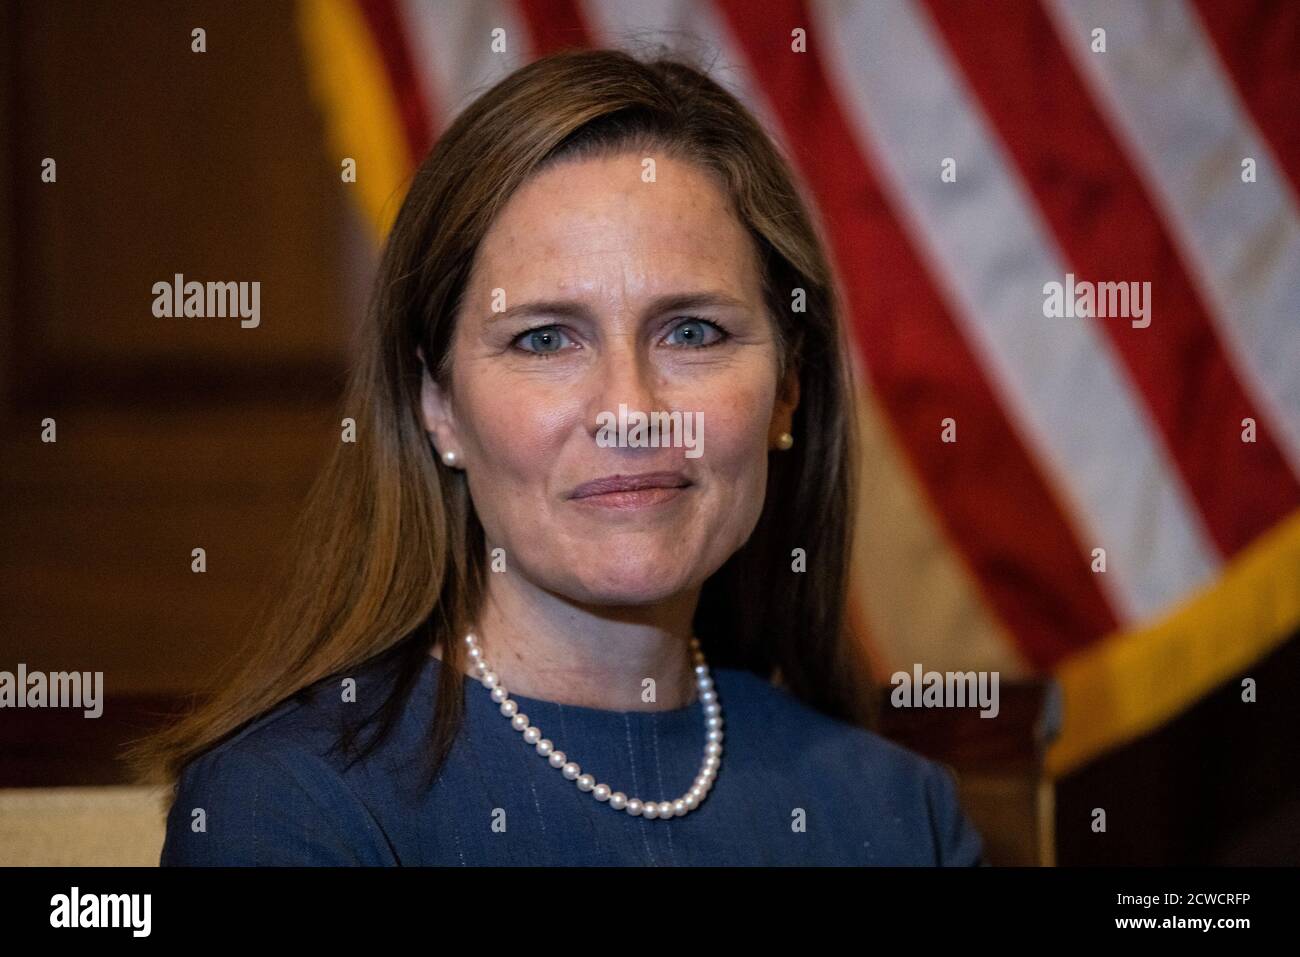 Judge Amy Coney Barrett, U.S. President Donald Trump's nominee for the U.S. Supreme Court, reacts, in the Capitol, in Washington, U.S., September 29, 2020. Graeme Jennings/Pool via REUTERS Stock Photo